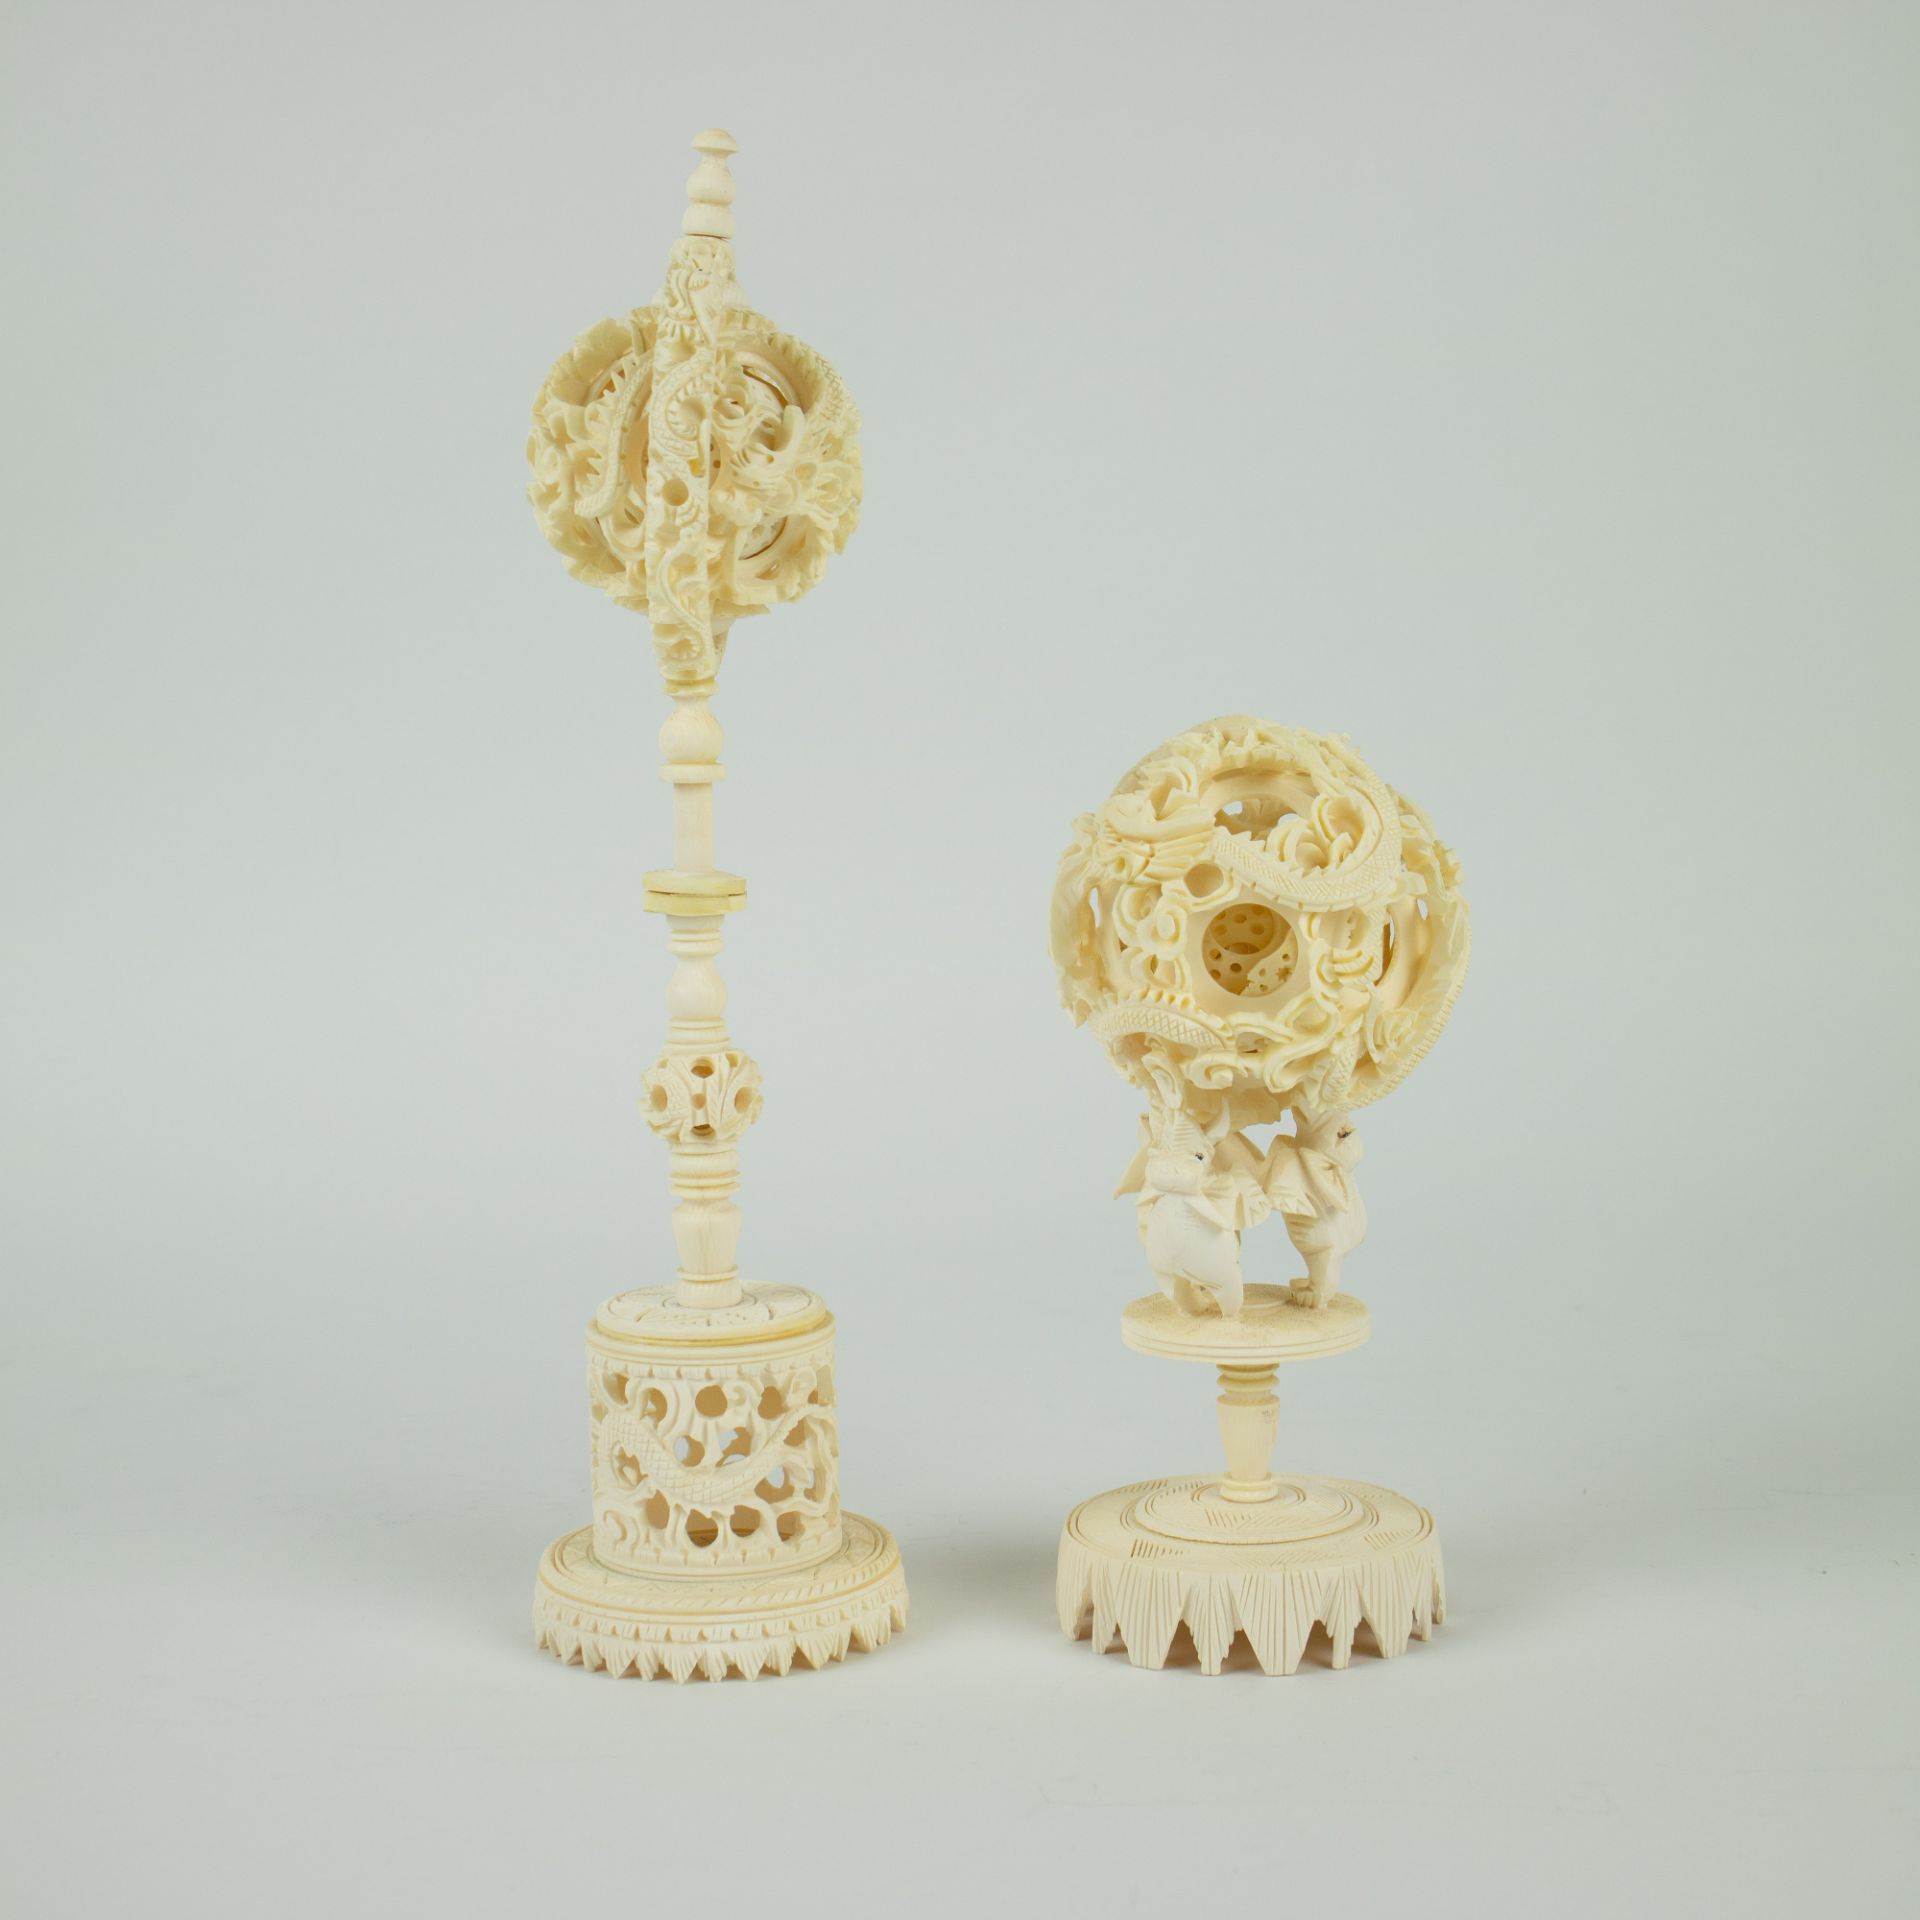 2 Canton ivory puzzle balls - Image 2 of 5